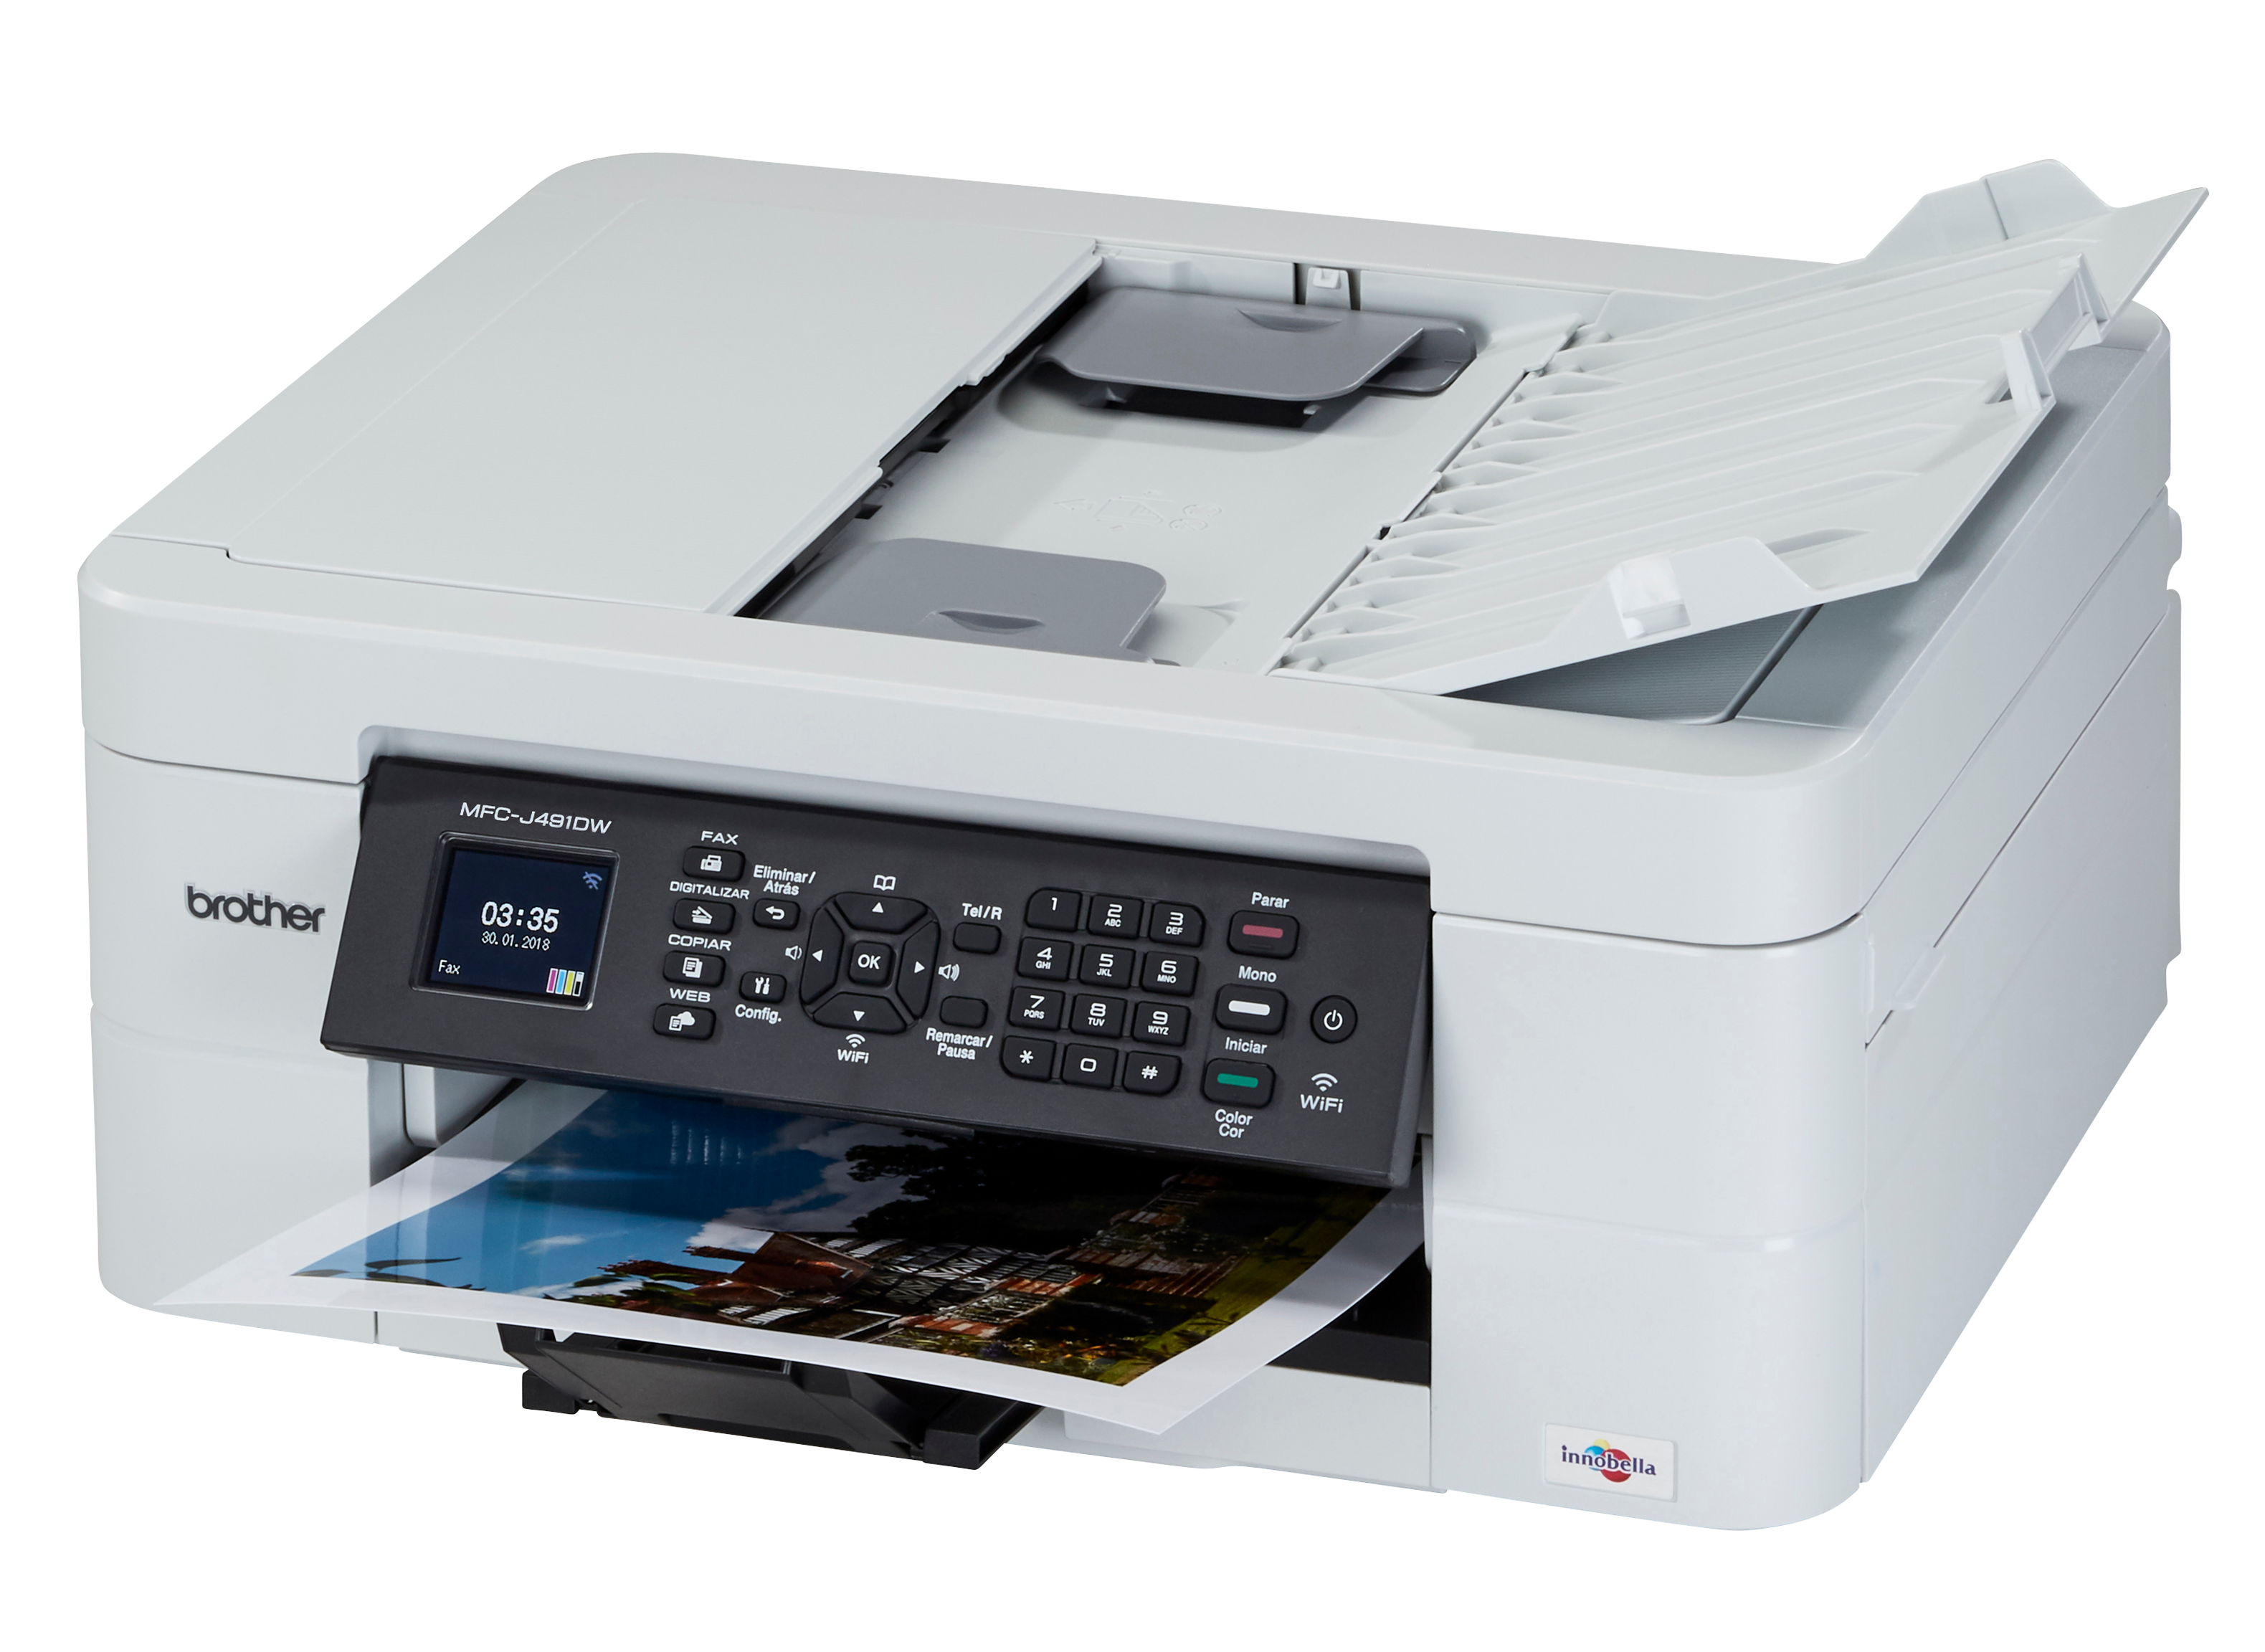 badminton bilag udbytte Brother MFC-J491DW Printer Review - Consumer Reports